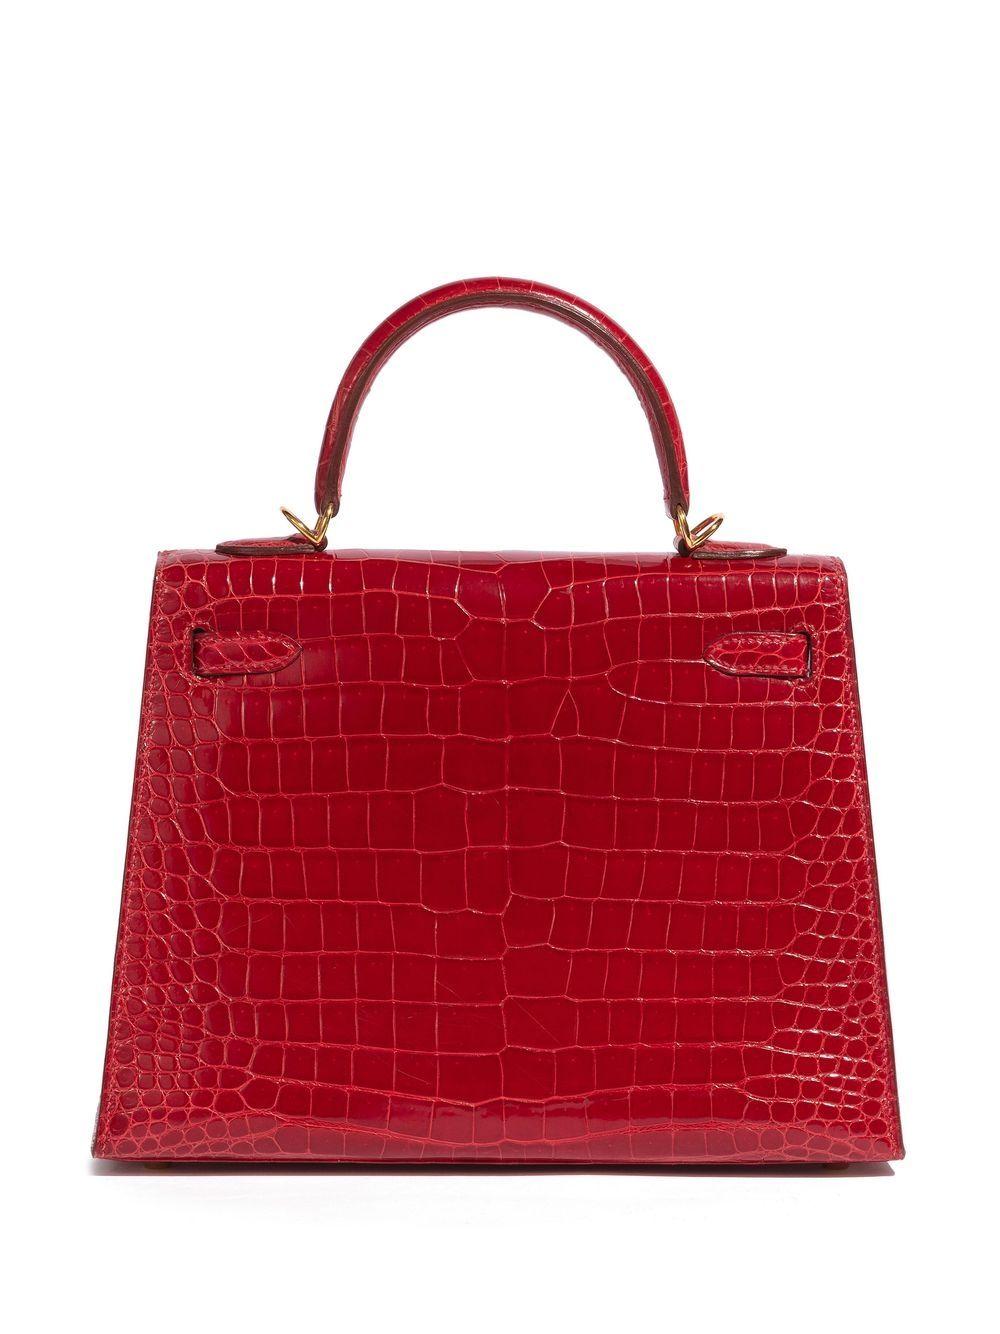 Hermès 25cm Shiny Niloticus Crocodile Kelly Bag with Gold Hardware In Excellent Condition In London, GB